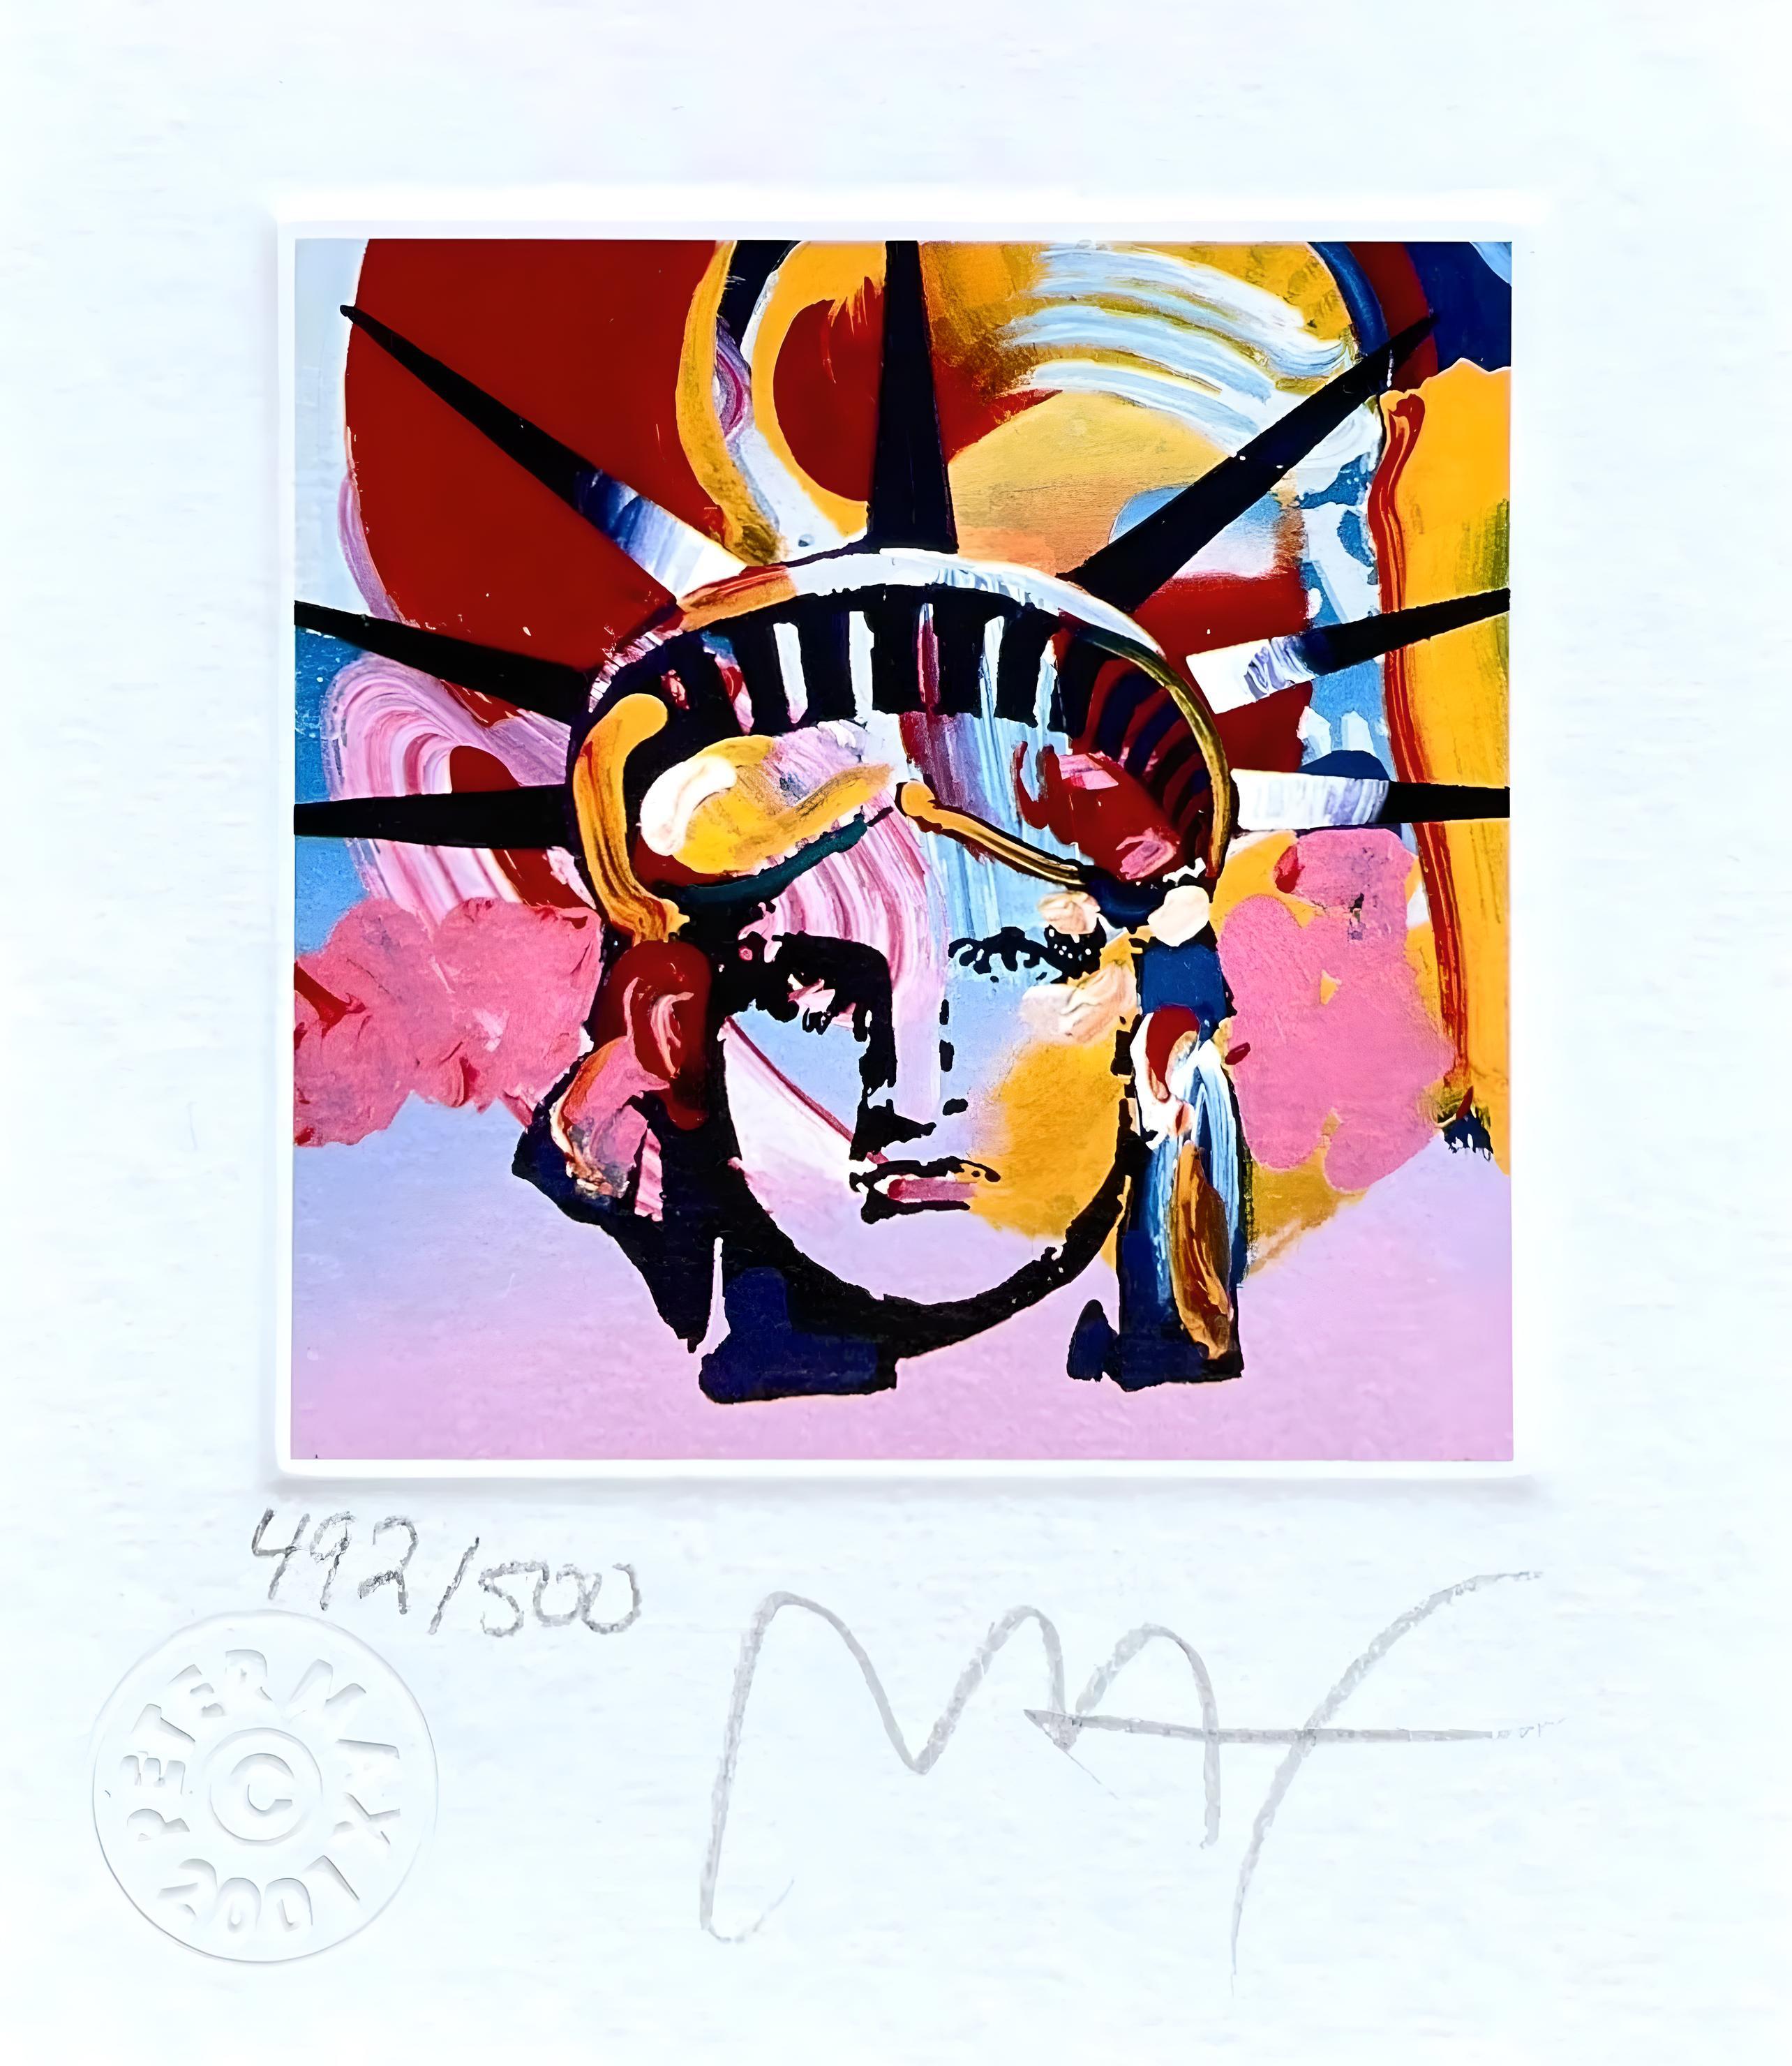 Artist: Peter Max (1937)
Title: Liberty Head VI
Year: 2001
Edition: 492/500, plus proofs
Medium: Lithograph on Lustro Saxony paper
Size: 3.5 x 3 inches
Condition: Excellent
Inscription: Signed and numbered by the artist.
Notes: Published by Via